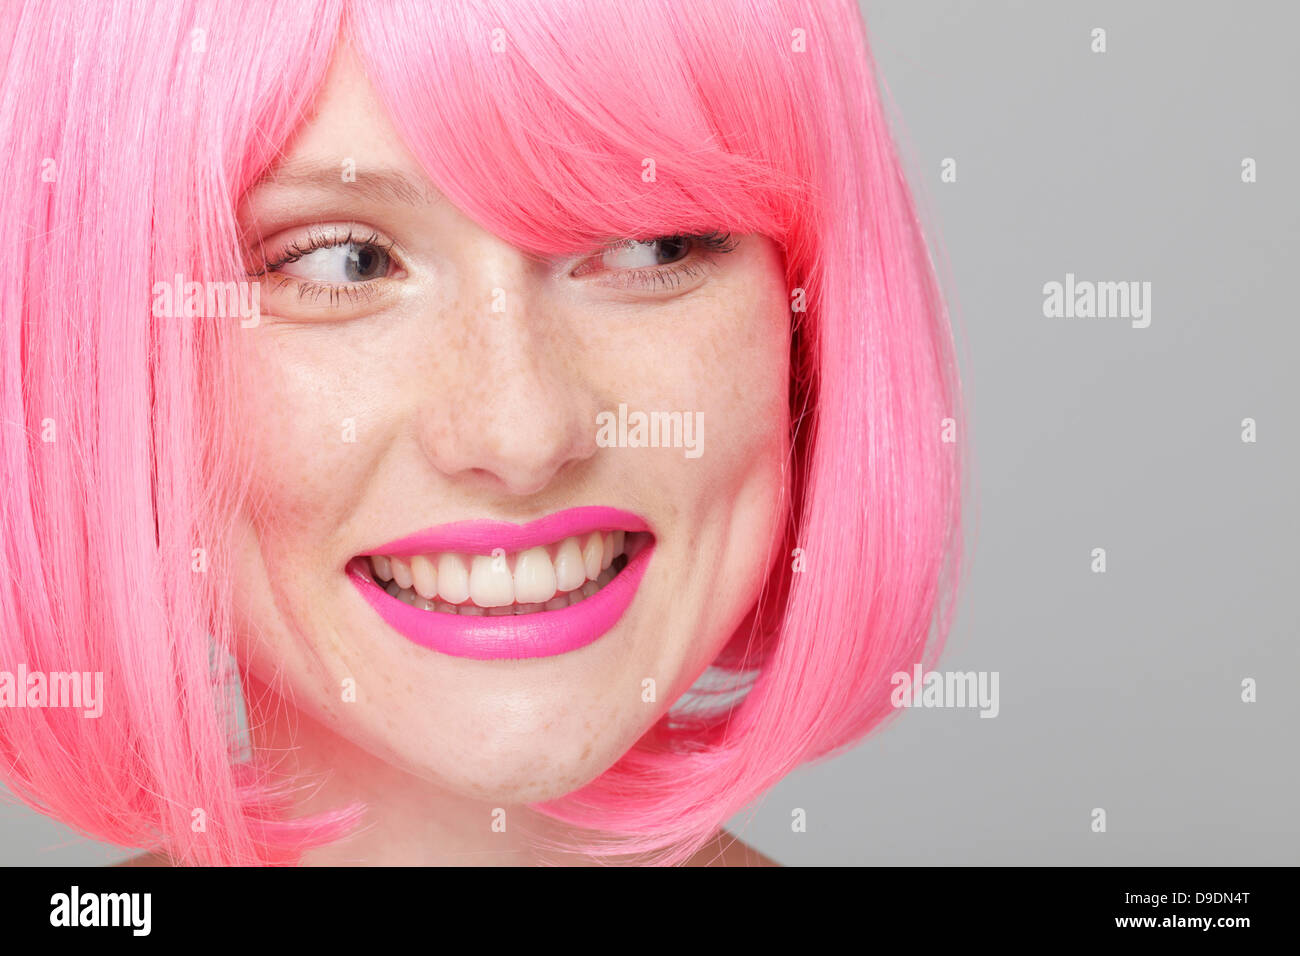 Close up of teenage girl with pink hair Stock Photo